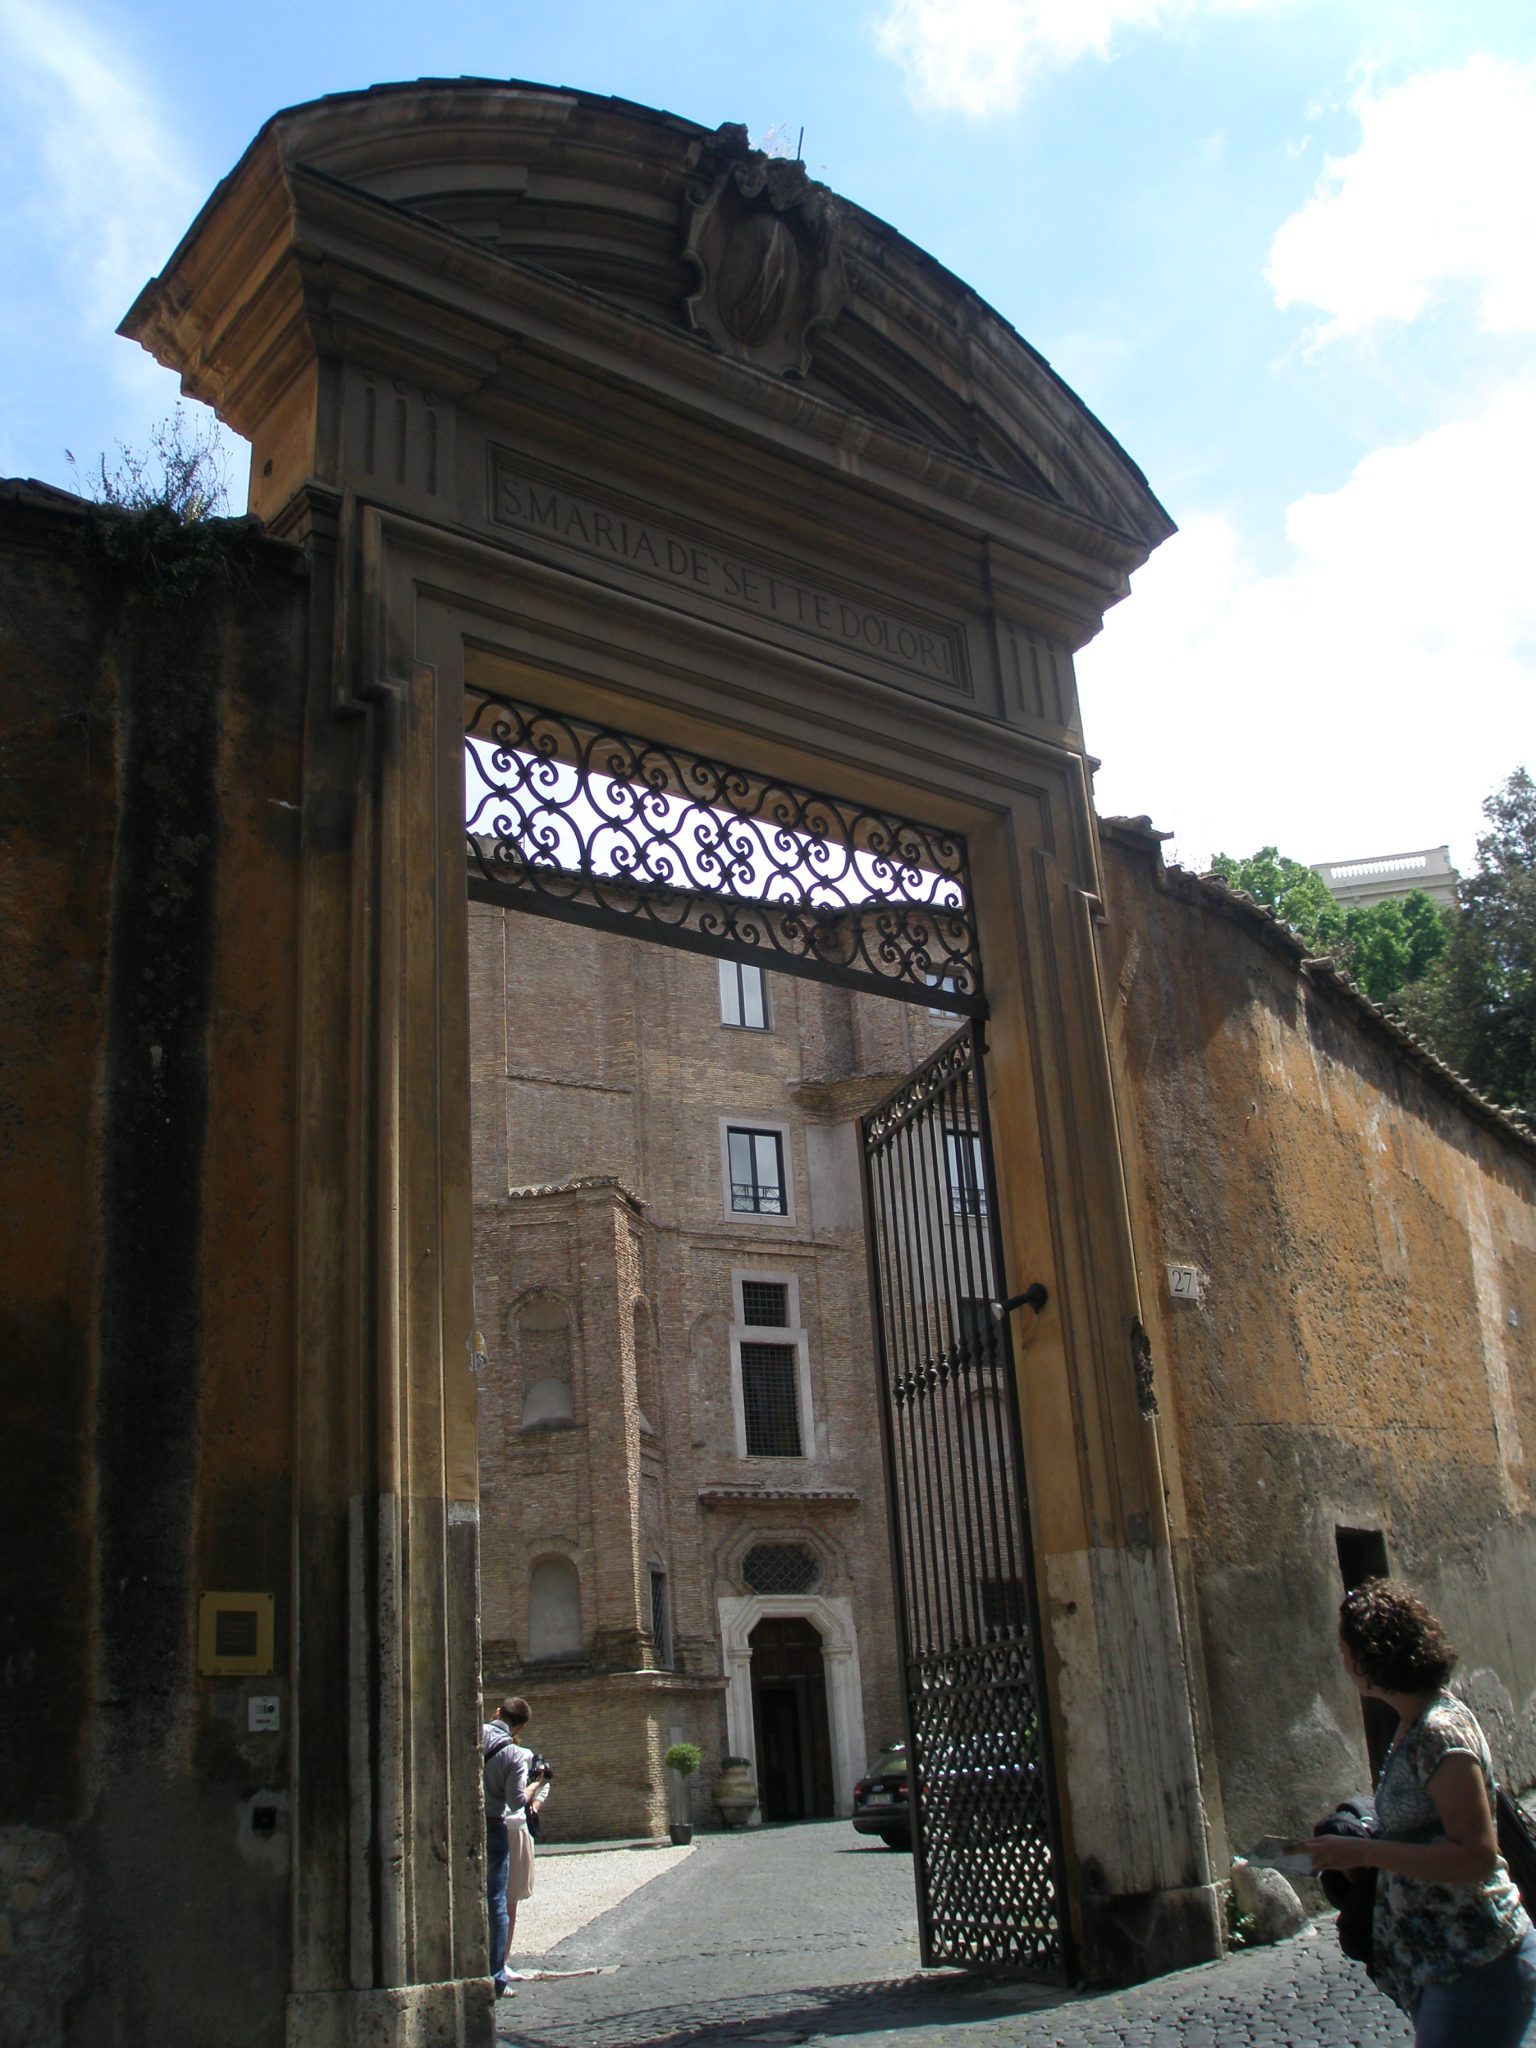 The imposing Entry Gate to the Donna Camilla Savelli Hotel's front courtyard, as seen from via Garibaldi.